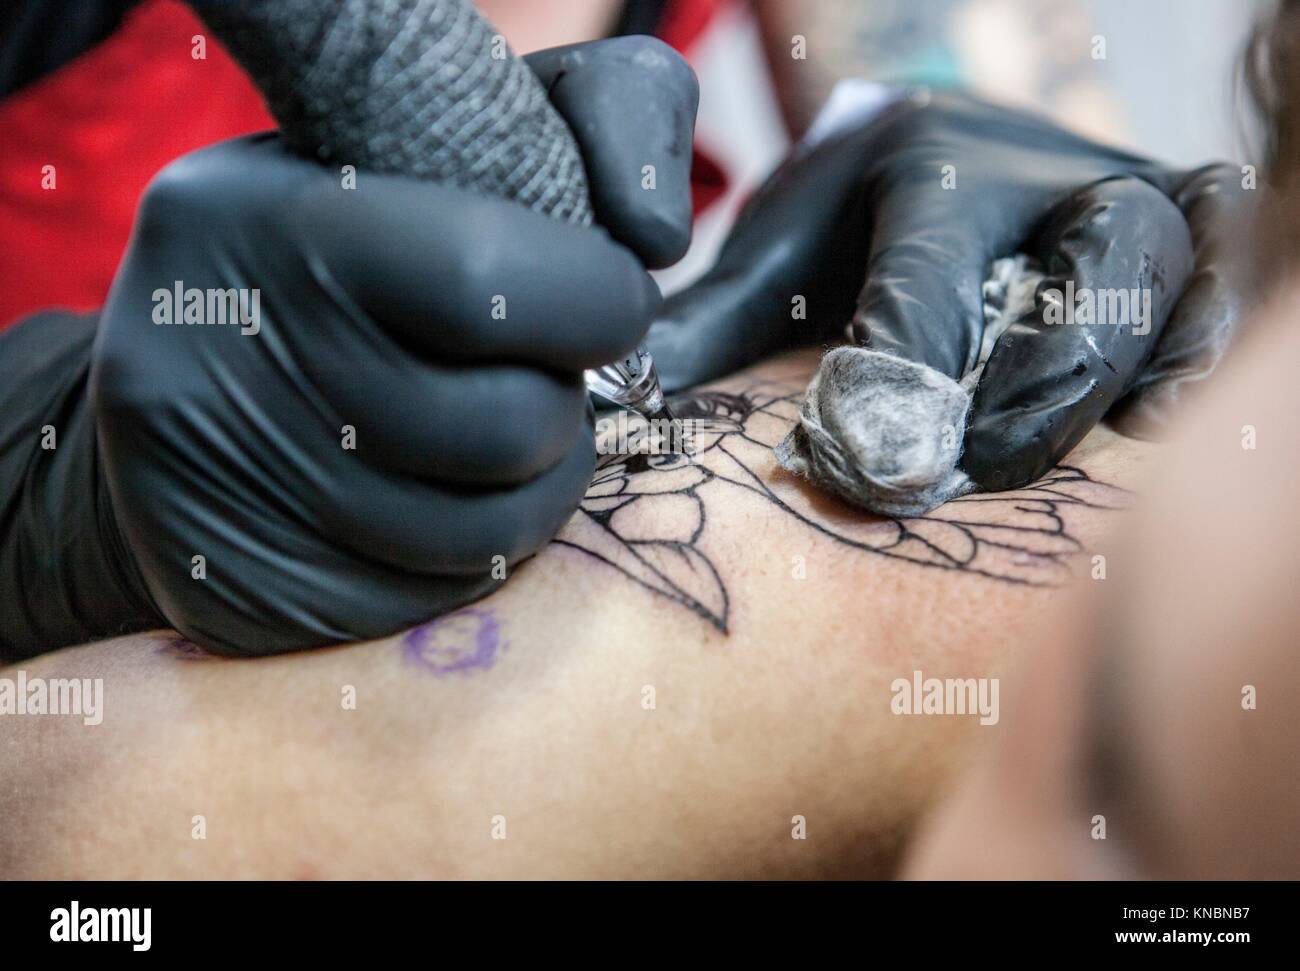 Tattoo artist applies tattoo to shoulder blade of a woman. She is outlining the tattoo. Stock Photo